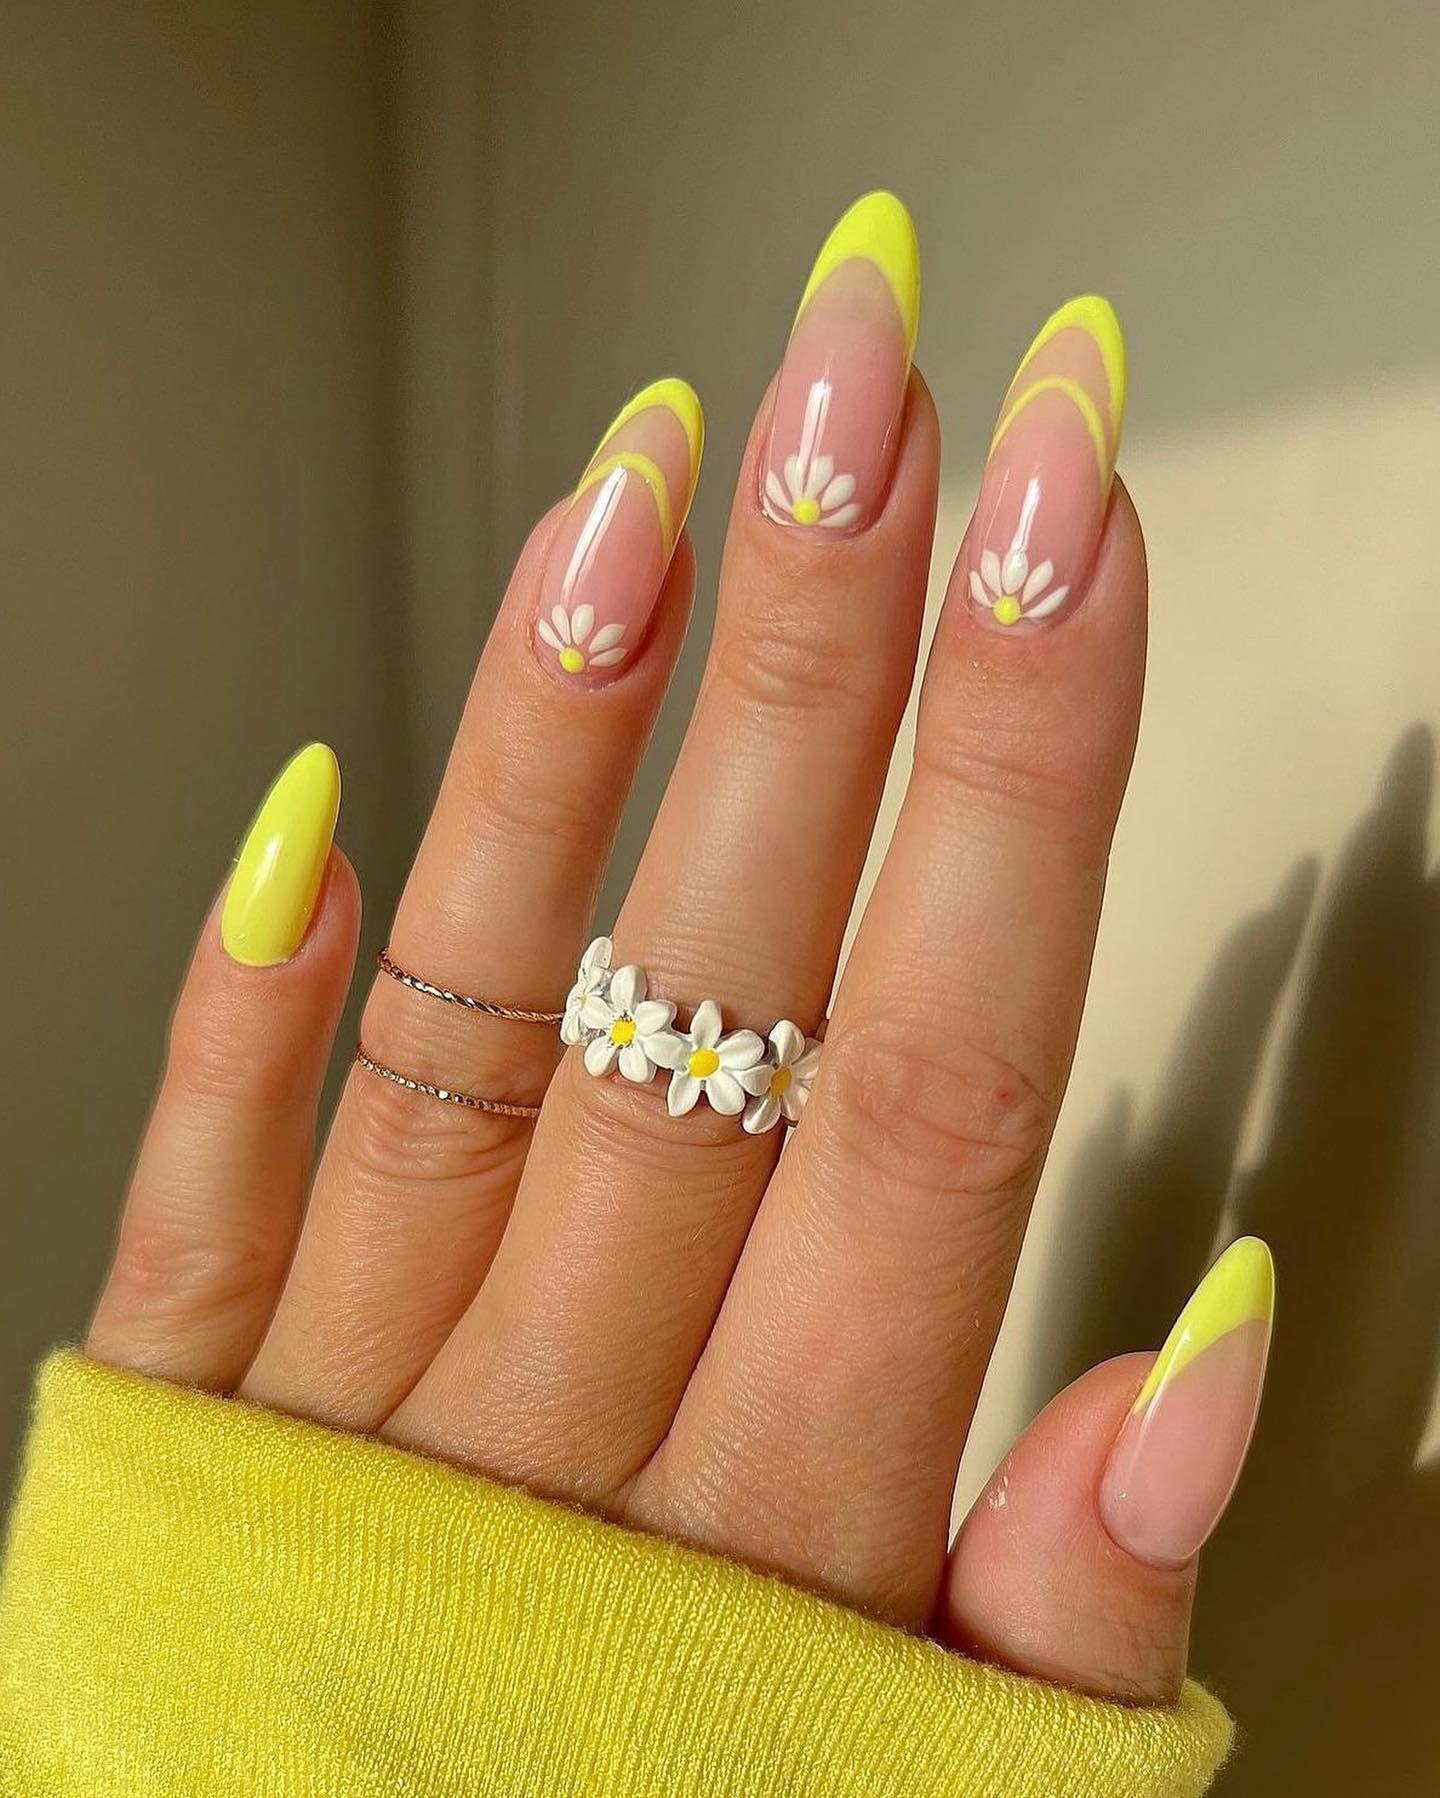 100 Of The Best Spring Inspired Nail Designs images 3